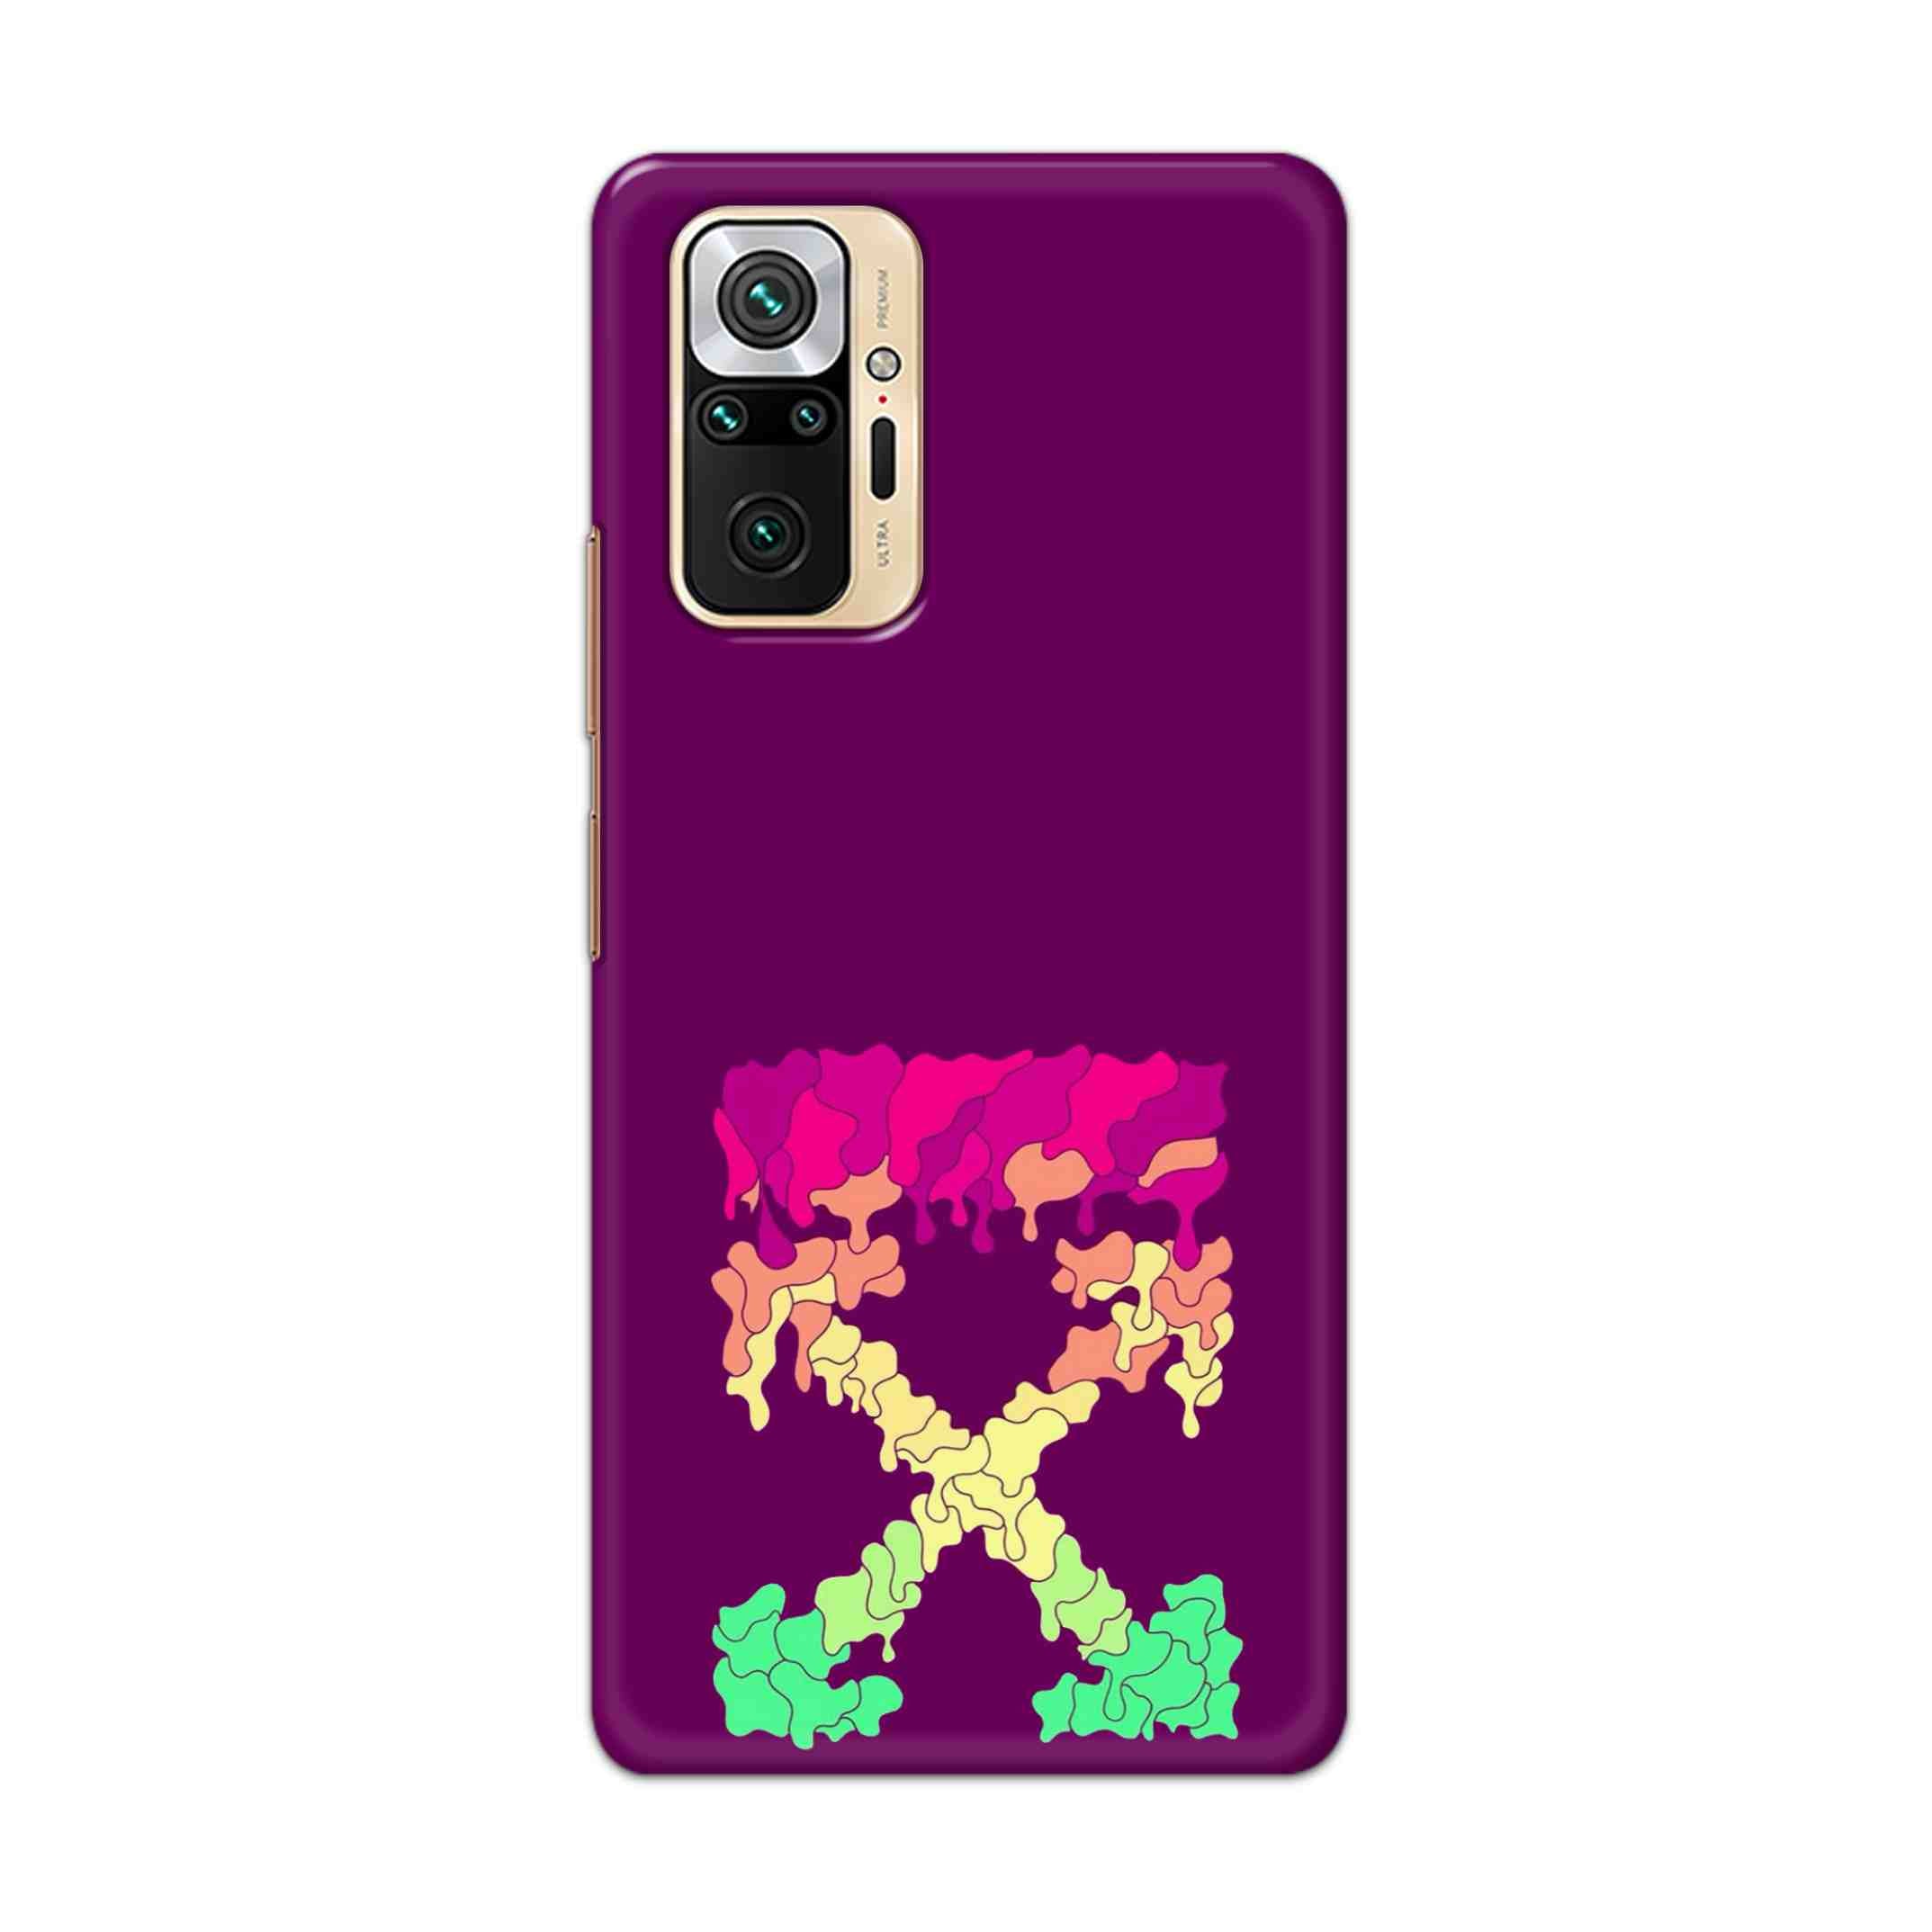 Buy X.O Hard Back Mobile Phone Case Cover For Redmi Note 10 Pro Online